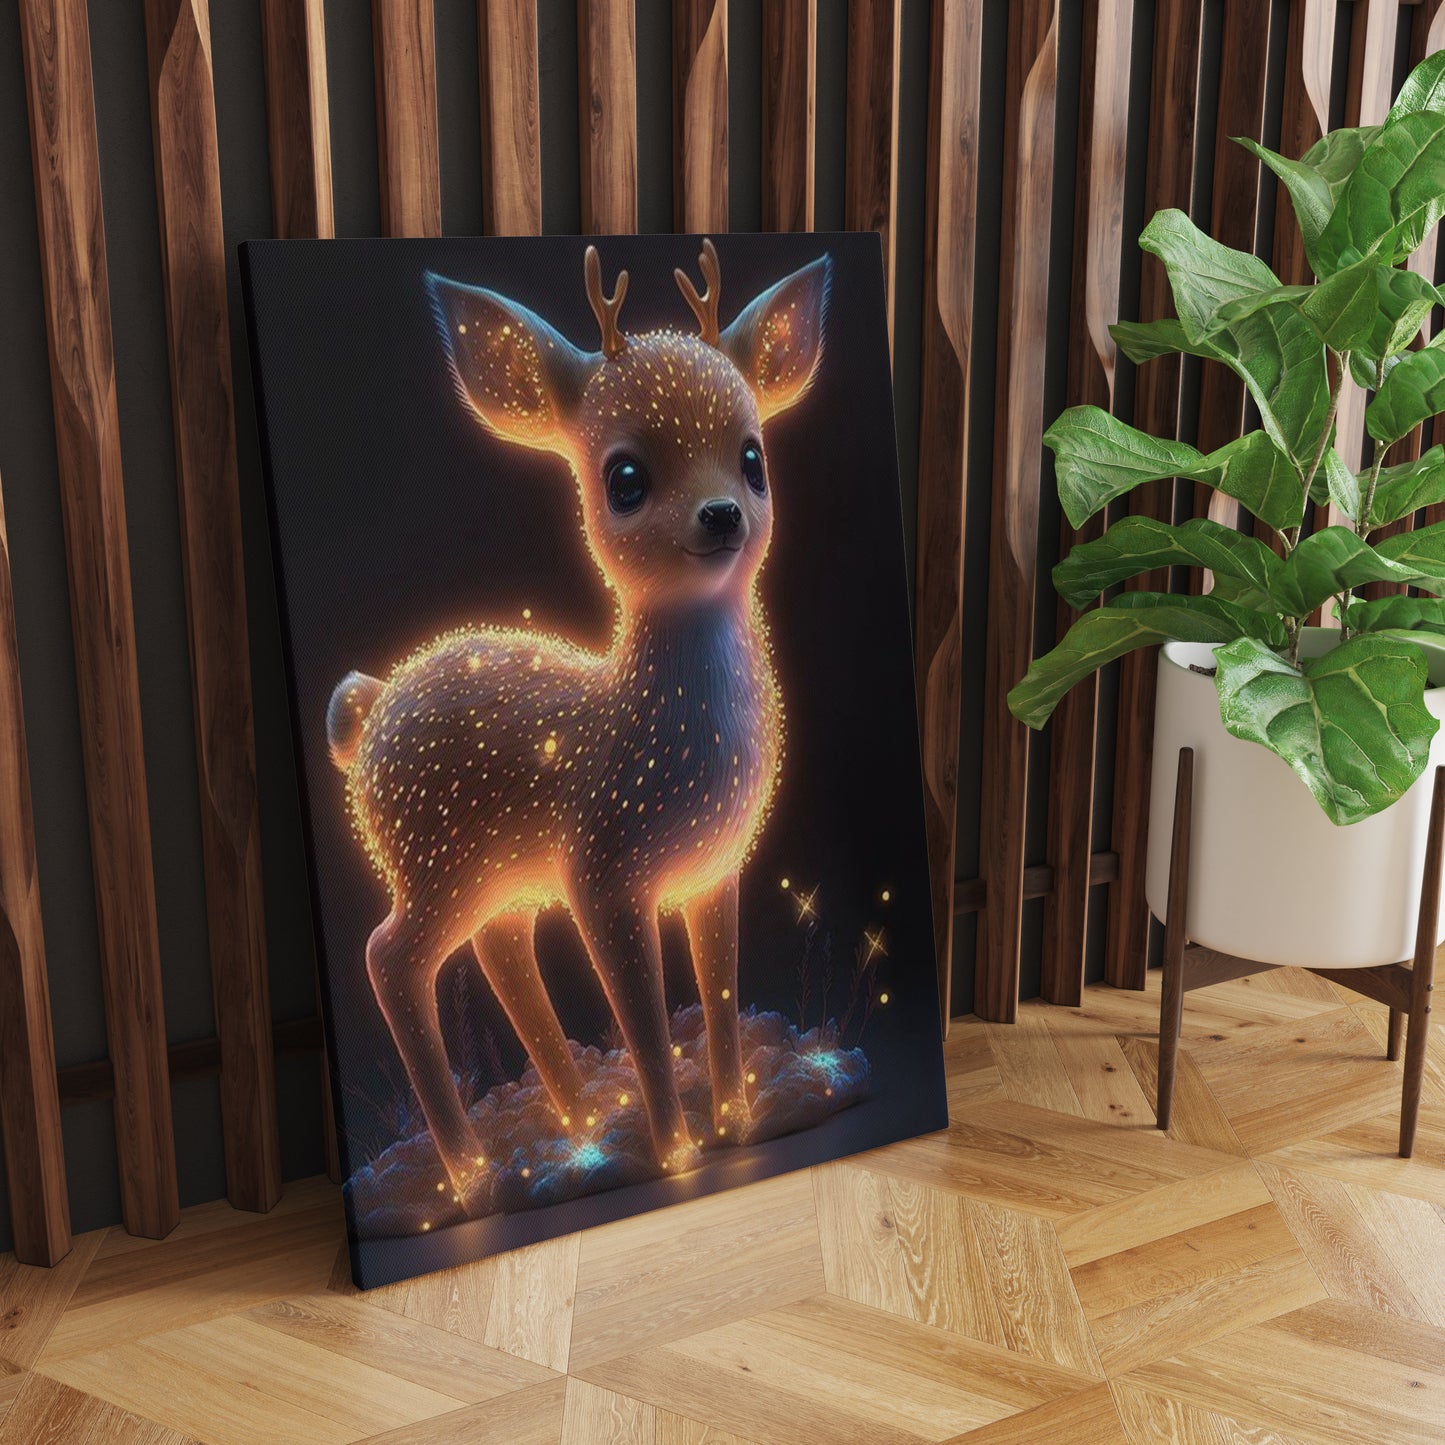 Luminous Innocence: Glowing Baby Deer - Enchanting Wall Art Celebrating the Radiant Beauty of Nature's Delicate Life Forms - S06E03